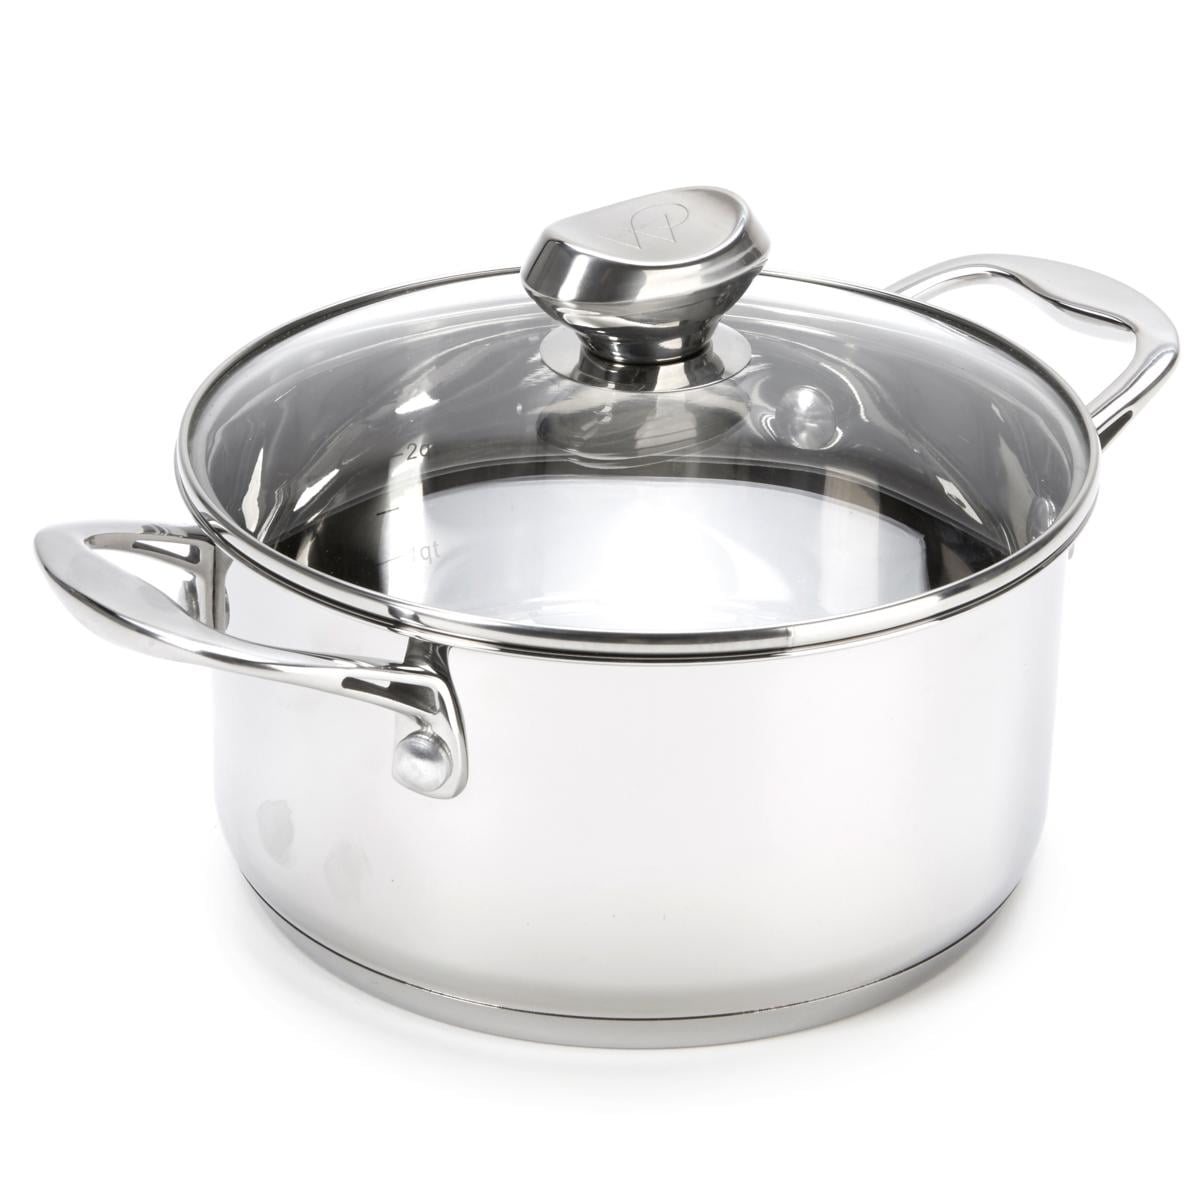 Wolfgang Puck Bistro Elite Cookware Set Only $150 - My DFW Mommy